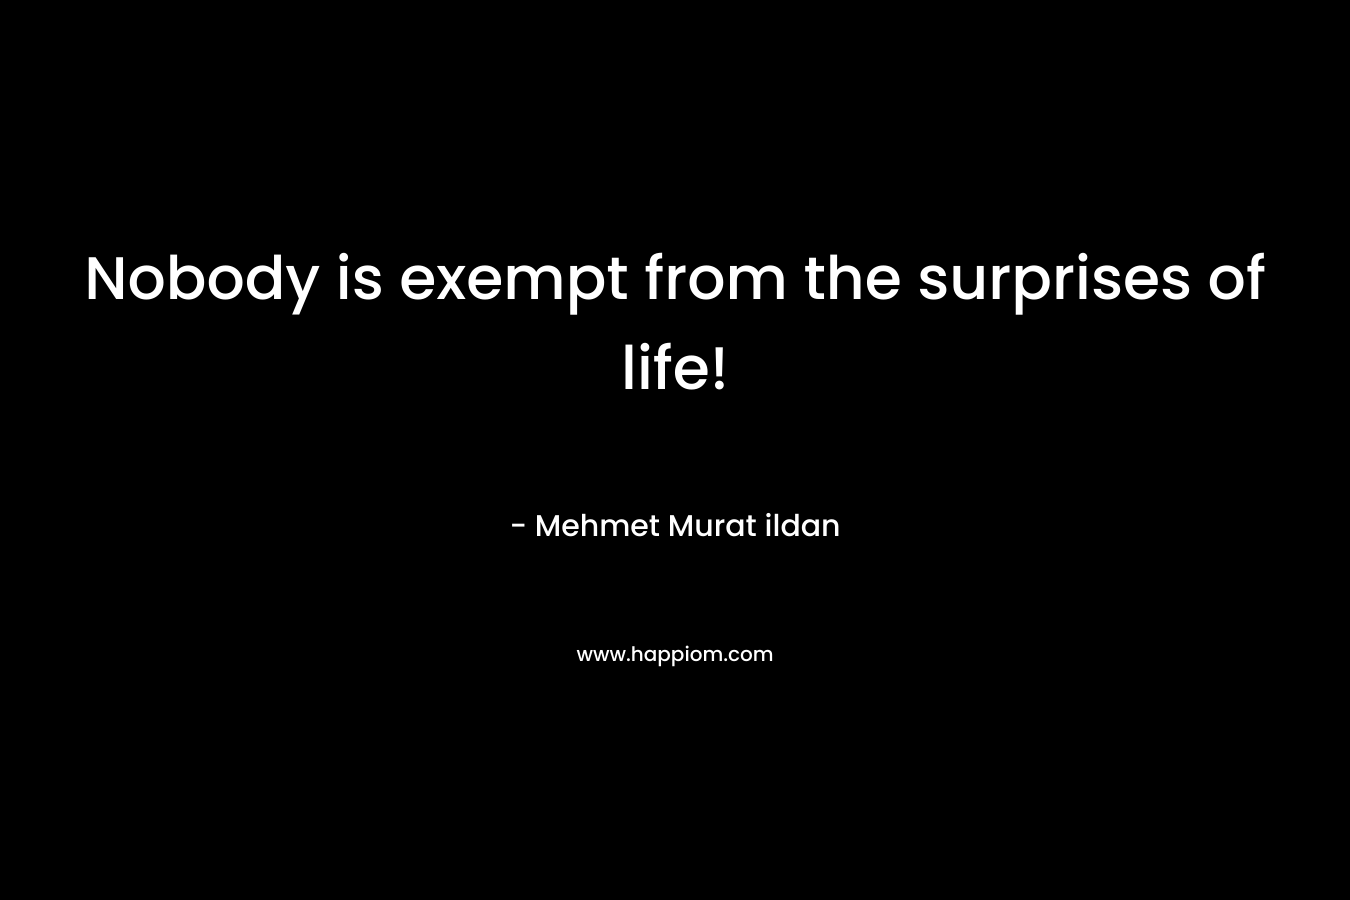 Nobody is exempt from the surprises of life!